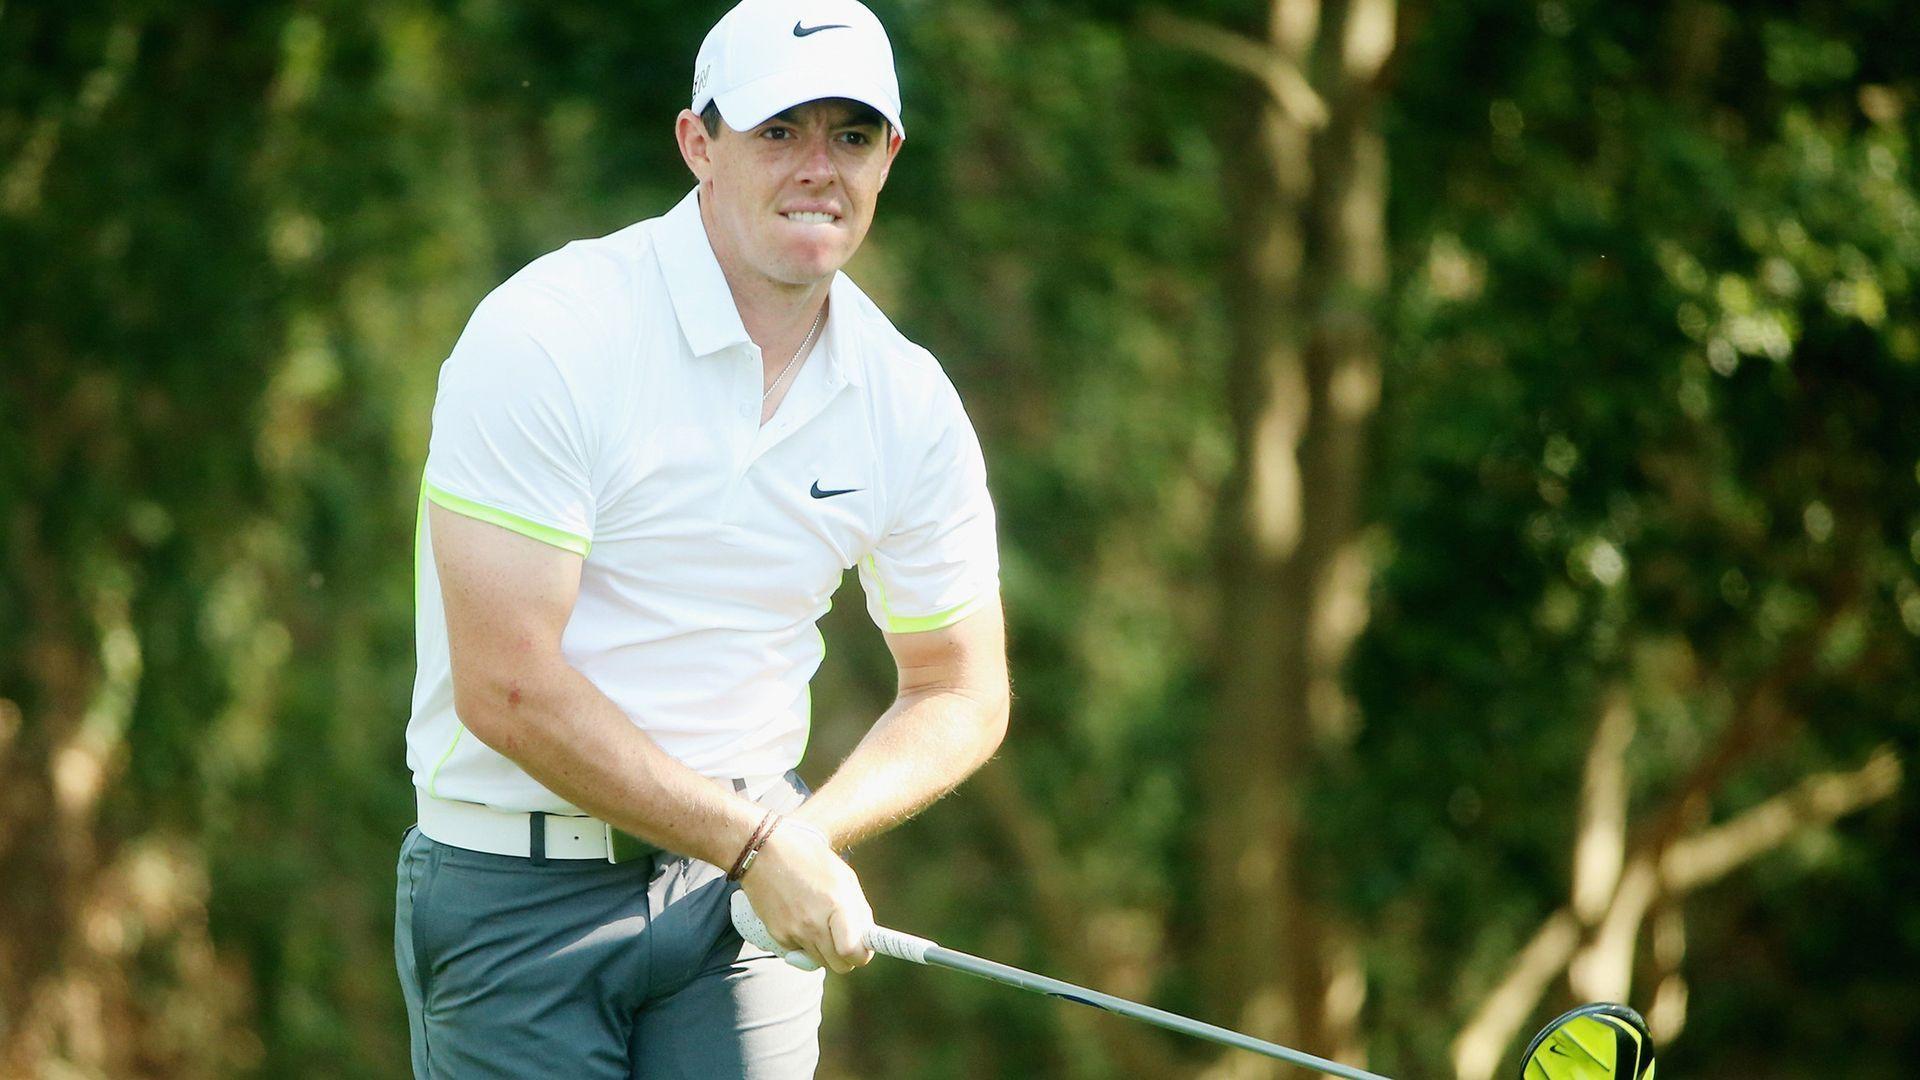 Rory McIlroy Latest Image And Full HD Wallpaper